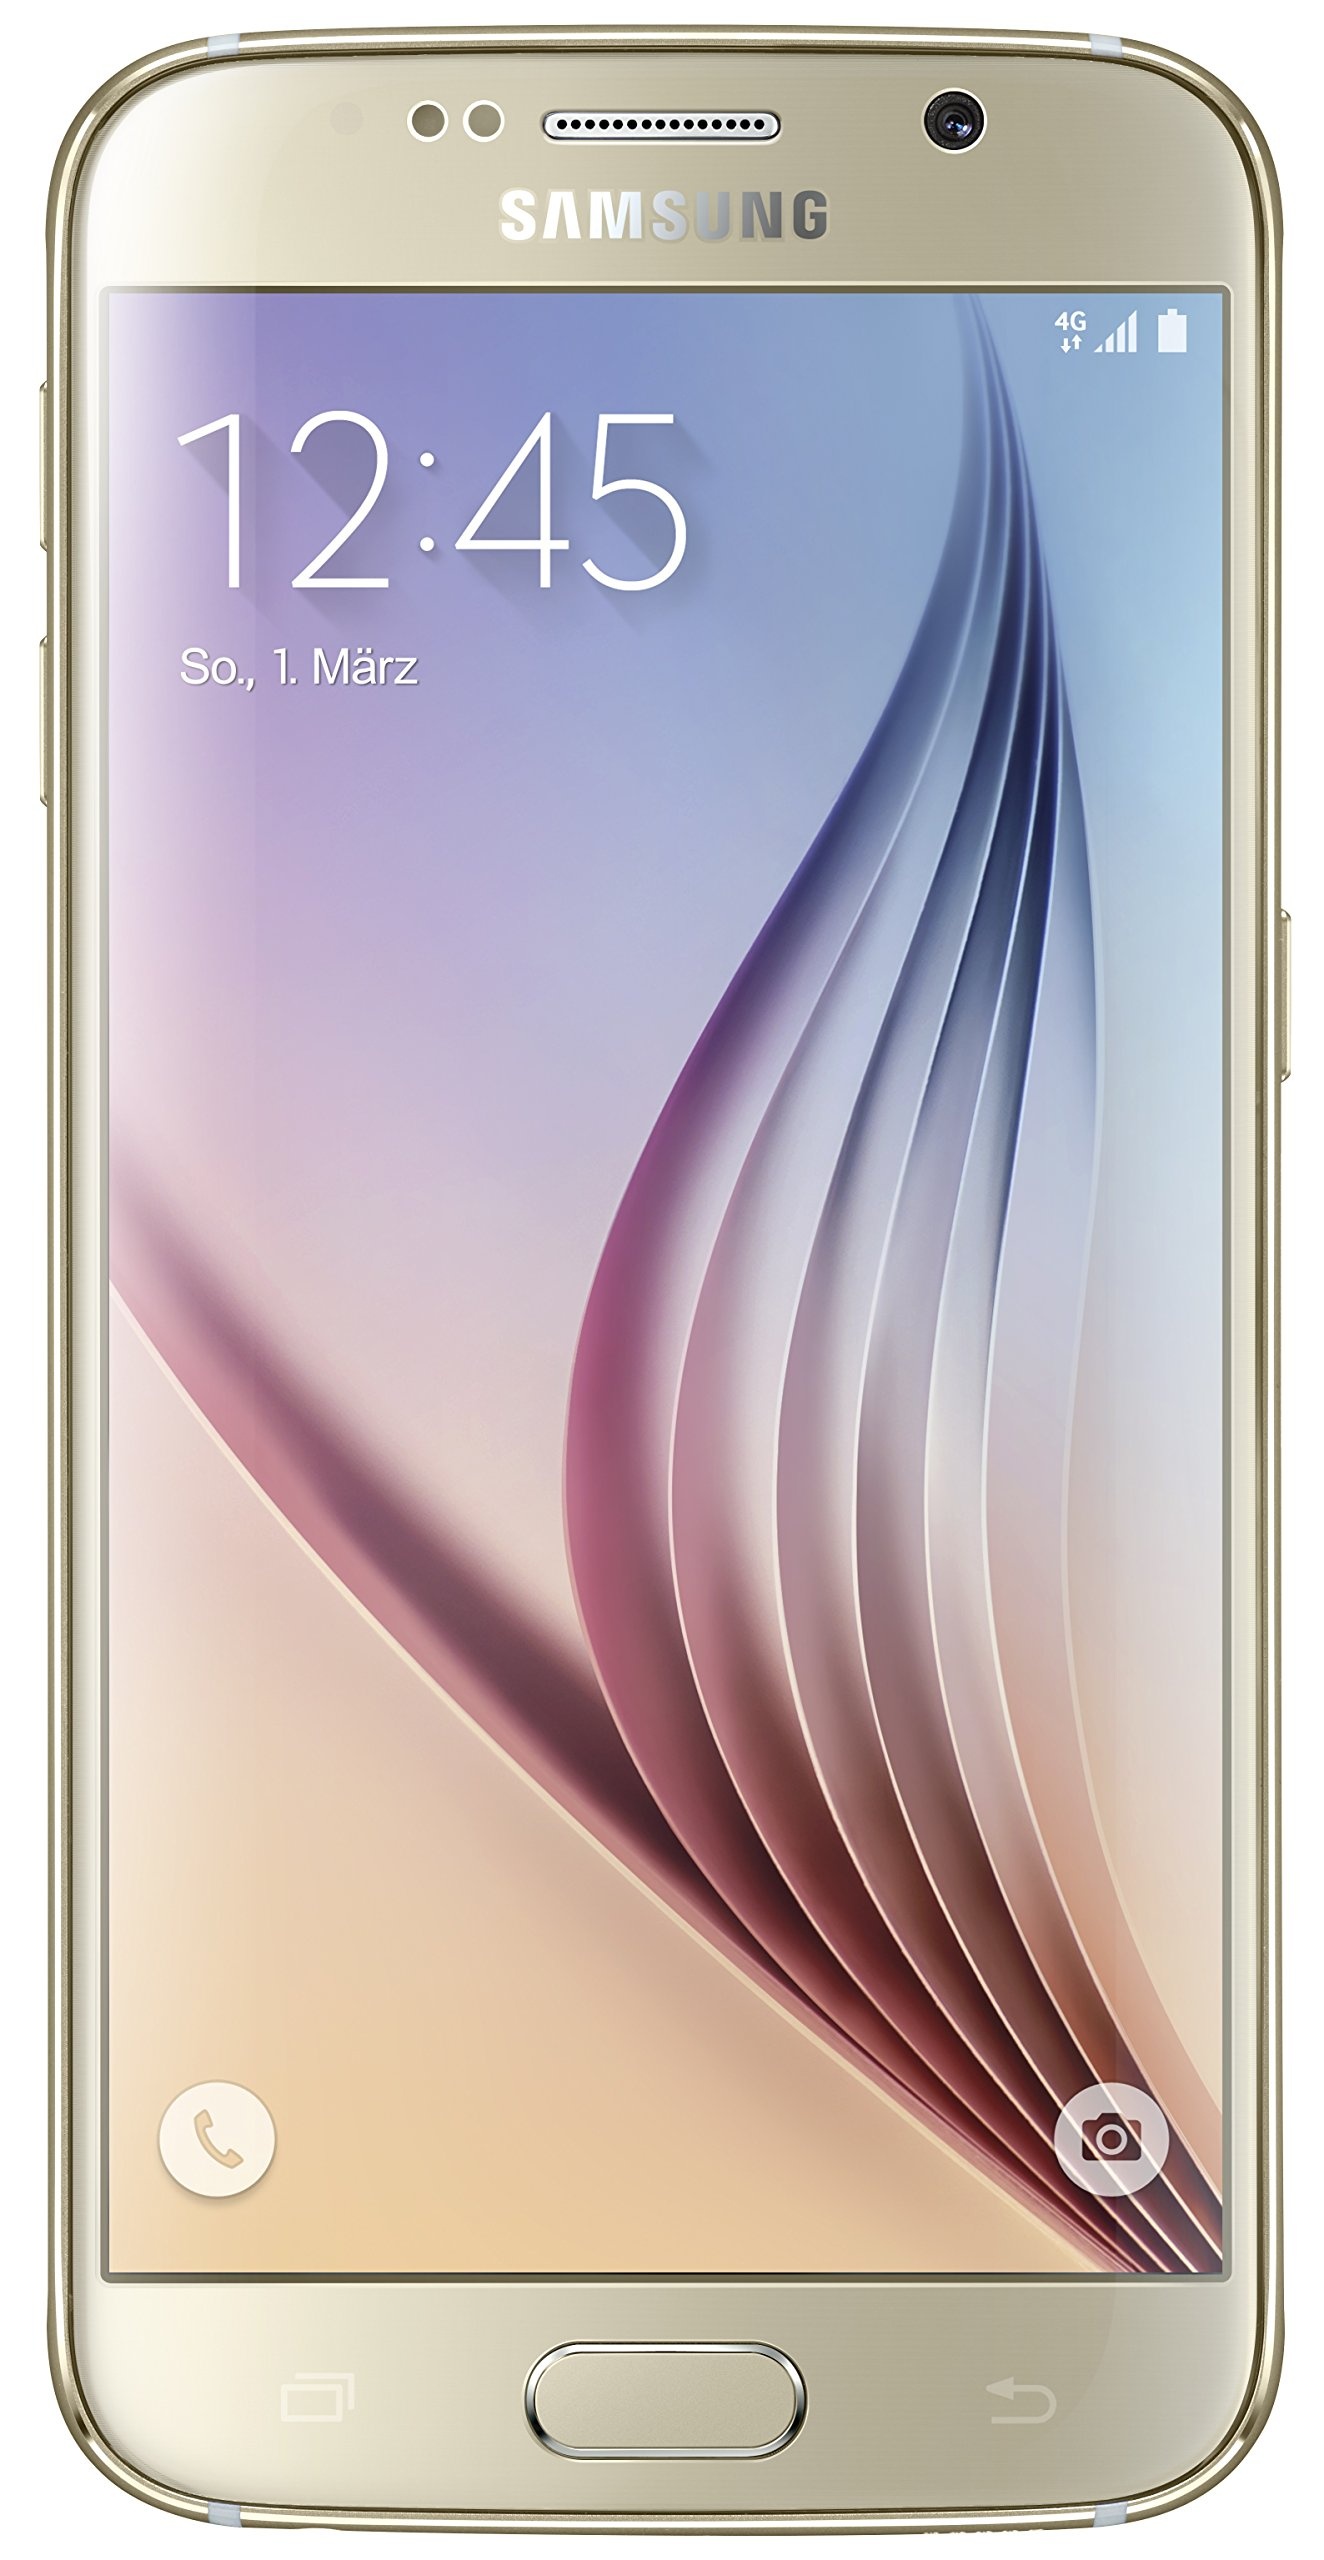 Samsung Galaxy S6 Smartphone (12,9 cm (5,1 Zoll) Touch-Display, 32GB Speicher, Android 5.0) gold [T-Mobile Branding]